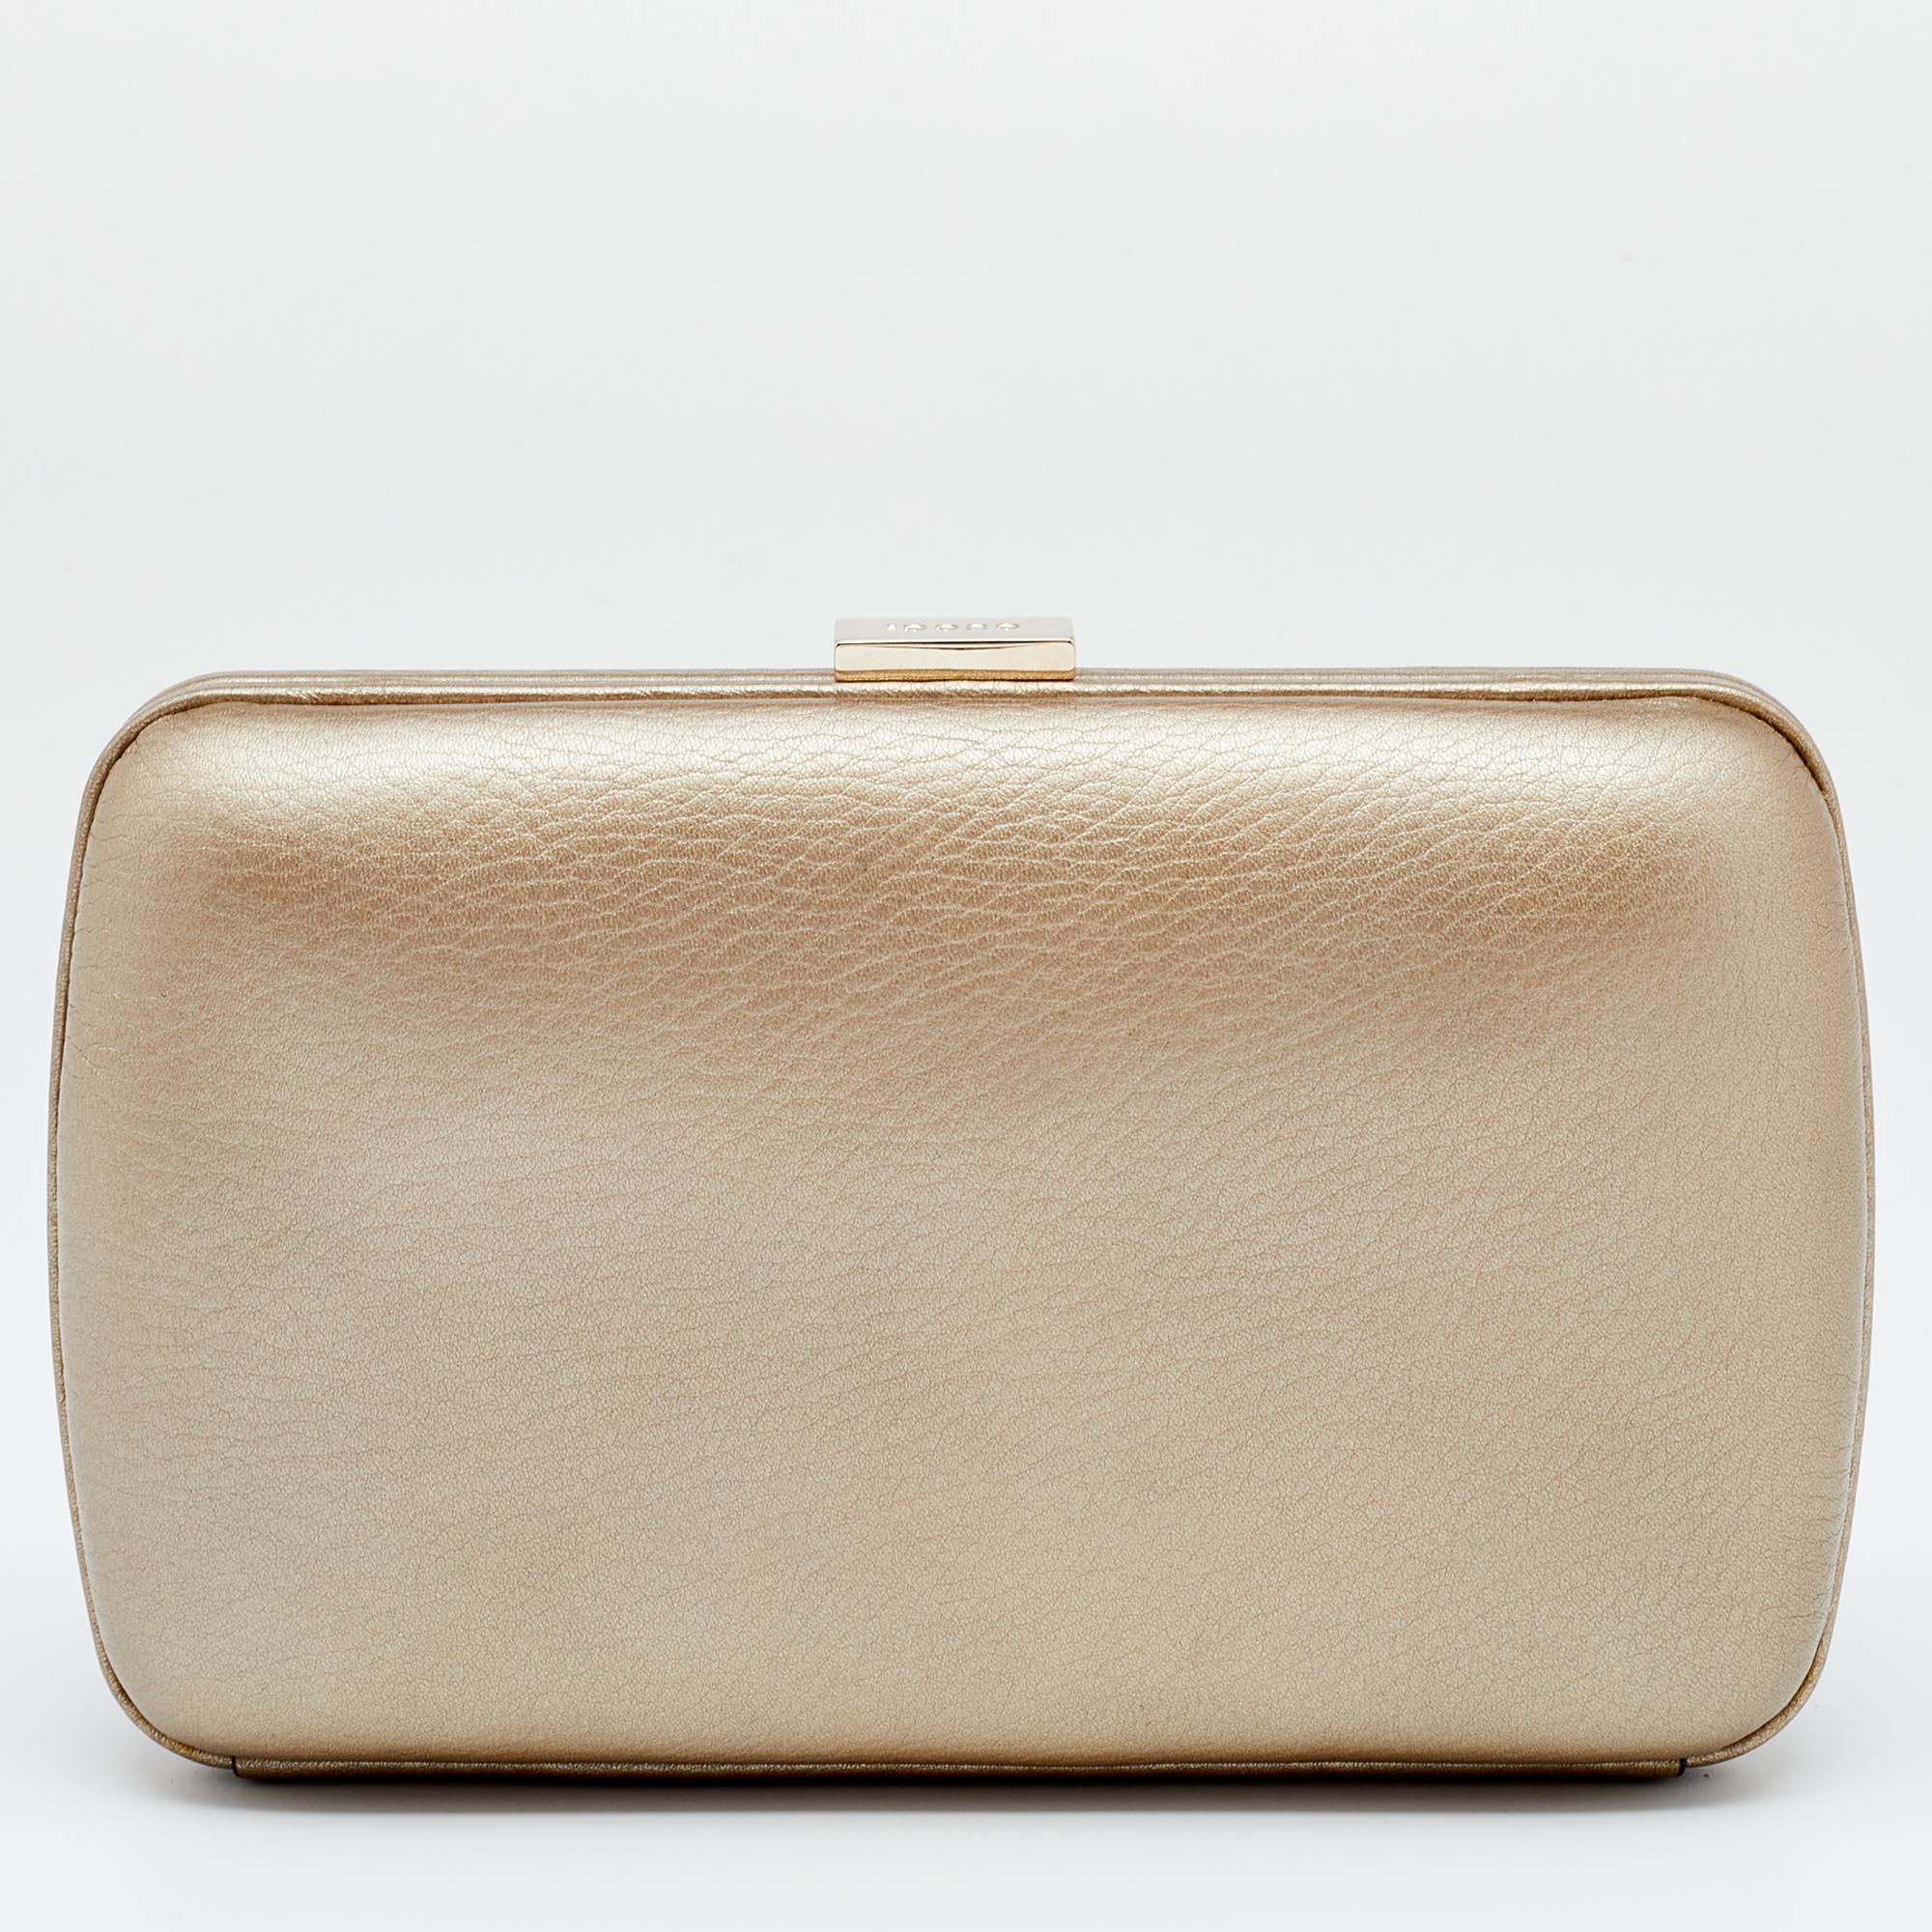 This clutch from Gucci has an appealing design, perfect to complement an evening dress or a party ensemble. Crafted from leather and gold-tone metal, the creation has a front GG logo, a well-lined interior, and a chain handle.

Includes: Original